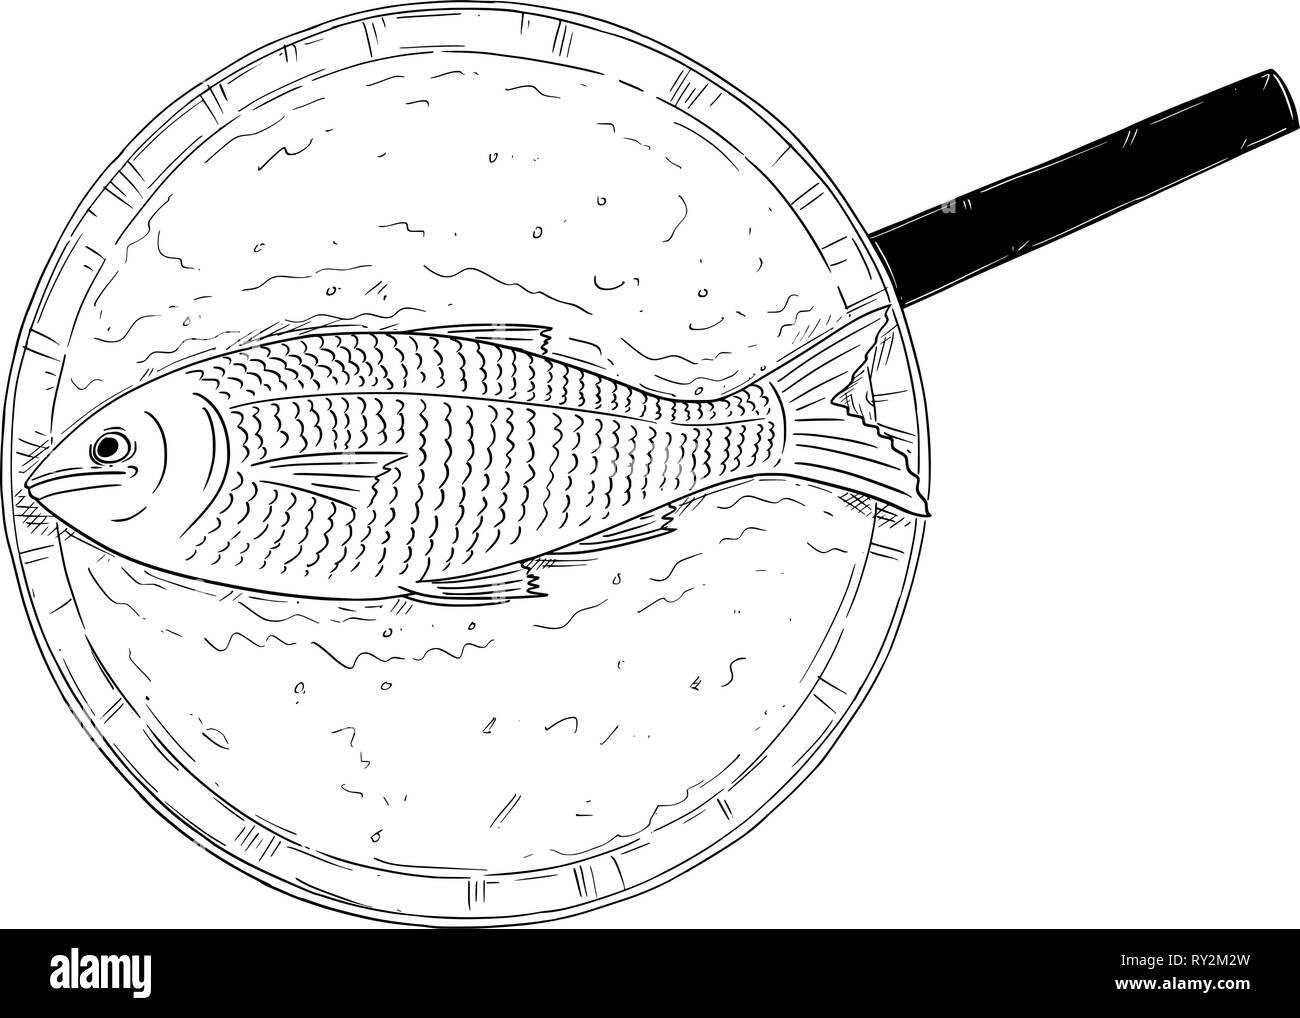 Cartoon Drawing of Top View of Fish Cooked on Frying Pan Stock Vector